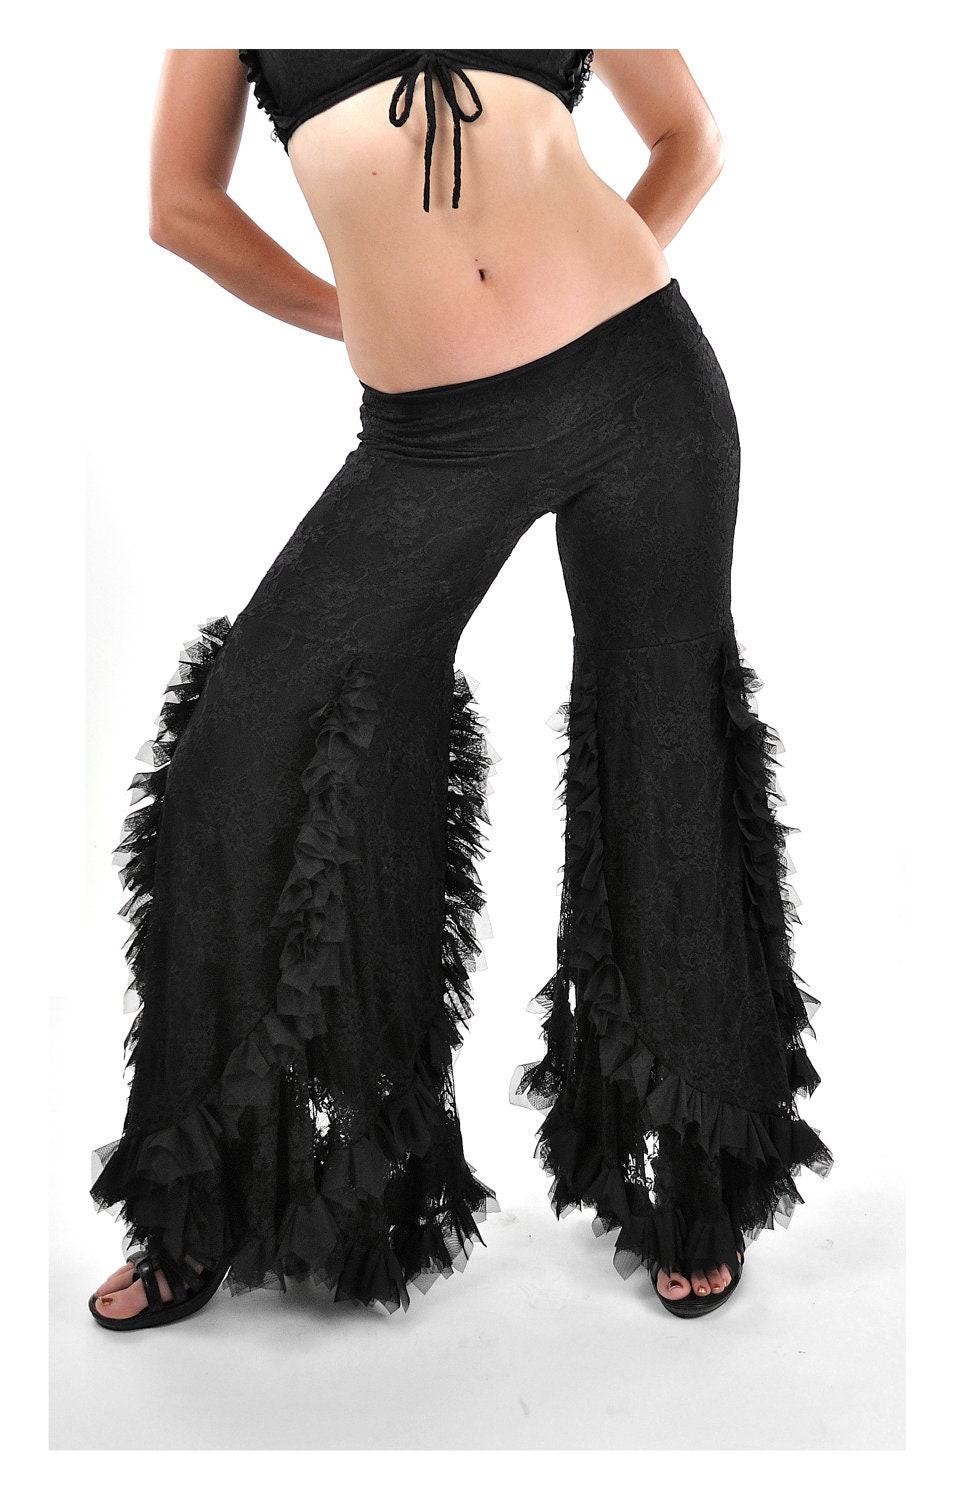 Black Lace Swan Pants belly dance tribal fusion by dreamingamelia